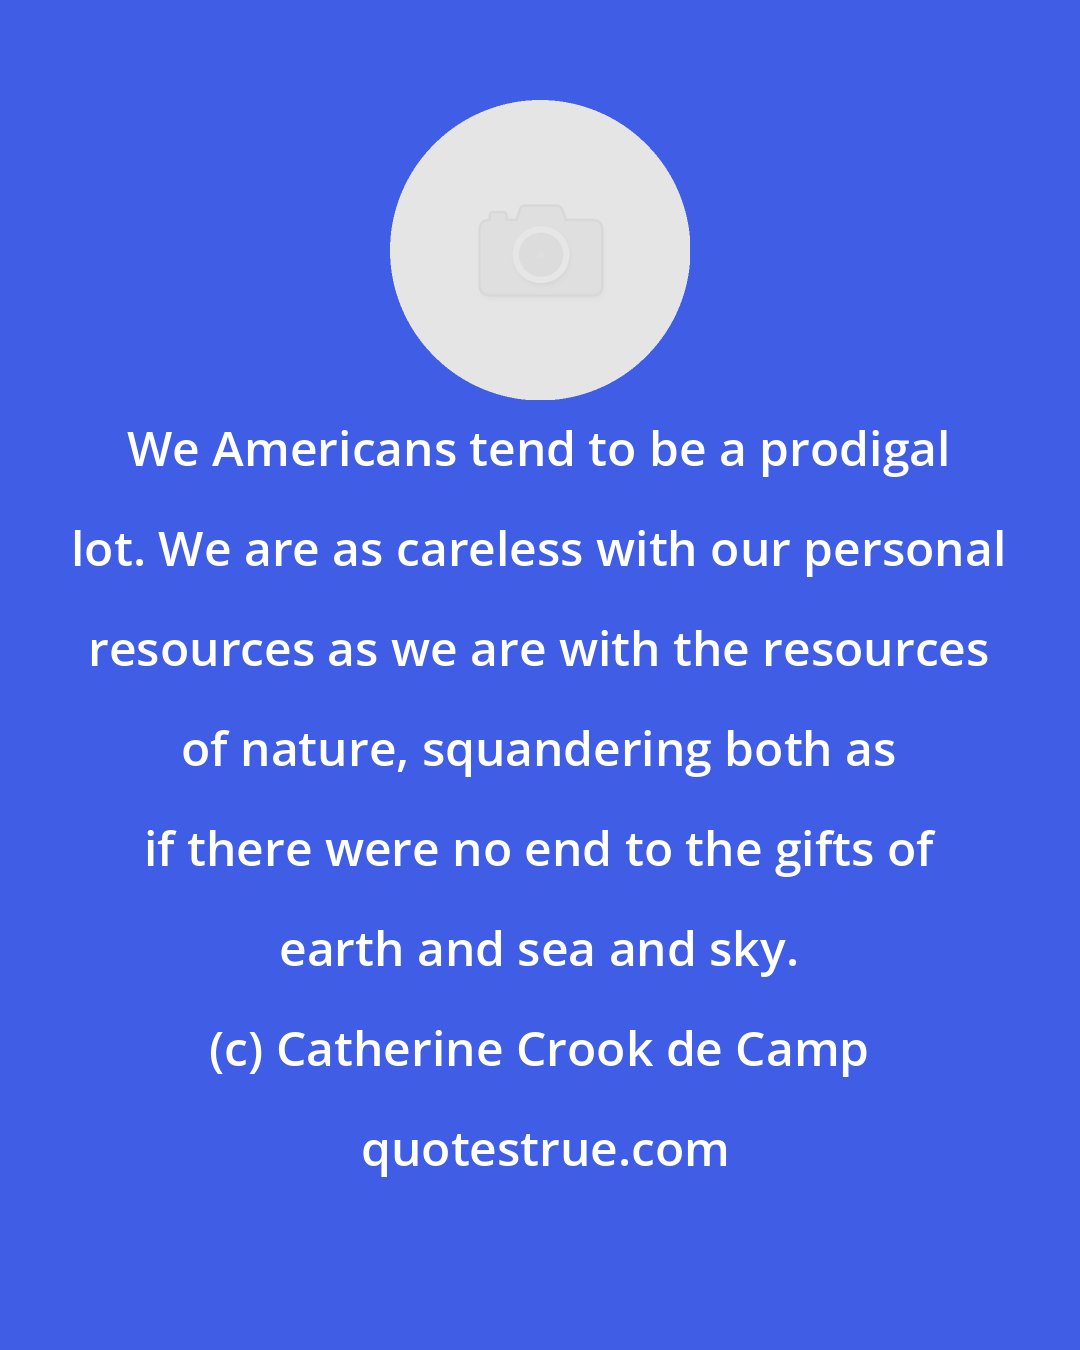 Catherine Crook de Camp: We Americans tend to be a prodigal lot. We are as careless with our personal resources as we are with the resources of nature, squandering both as if there were no end to the gifts of earth and sea and sky.